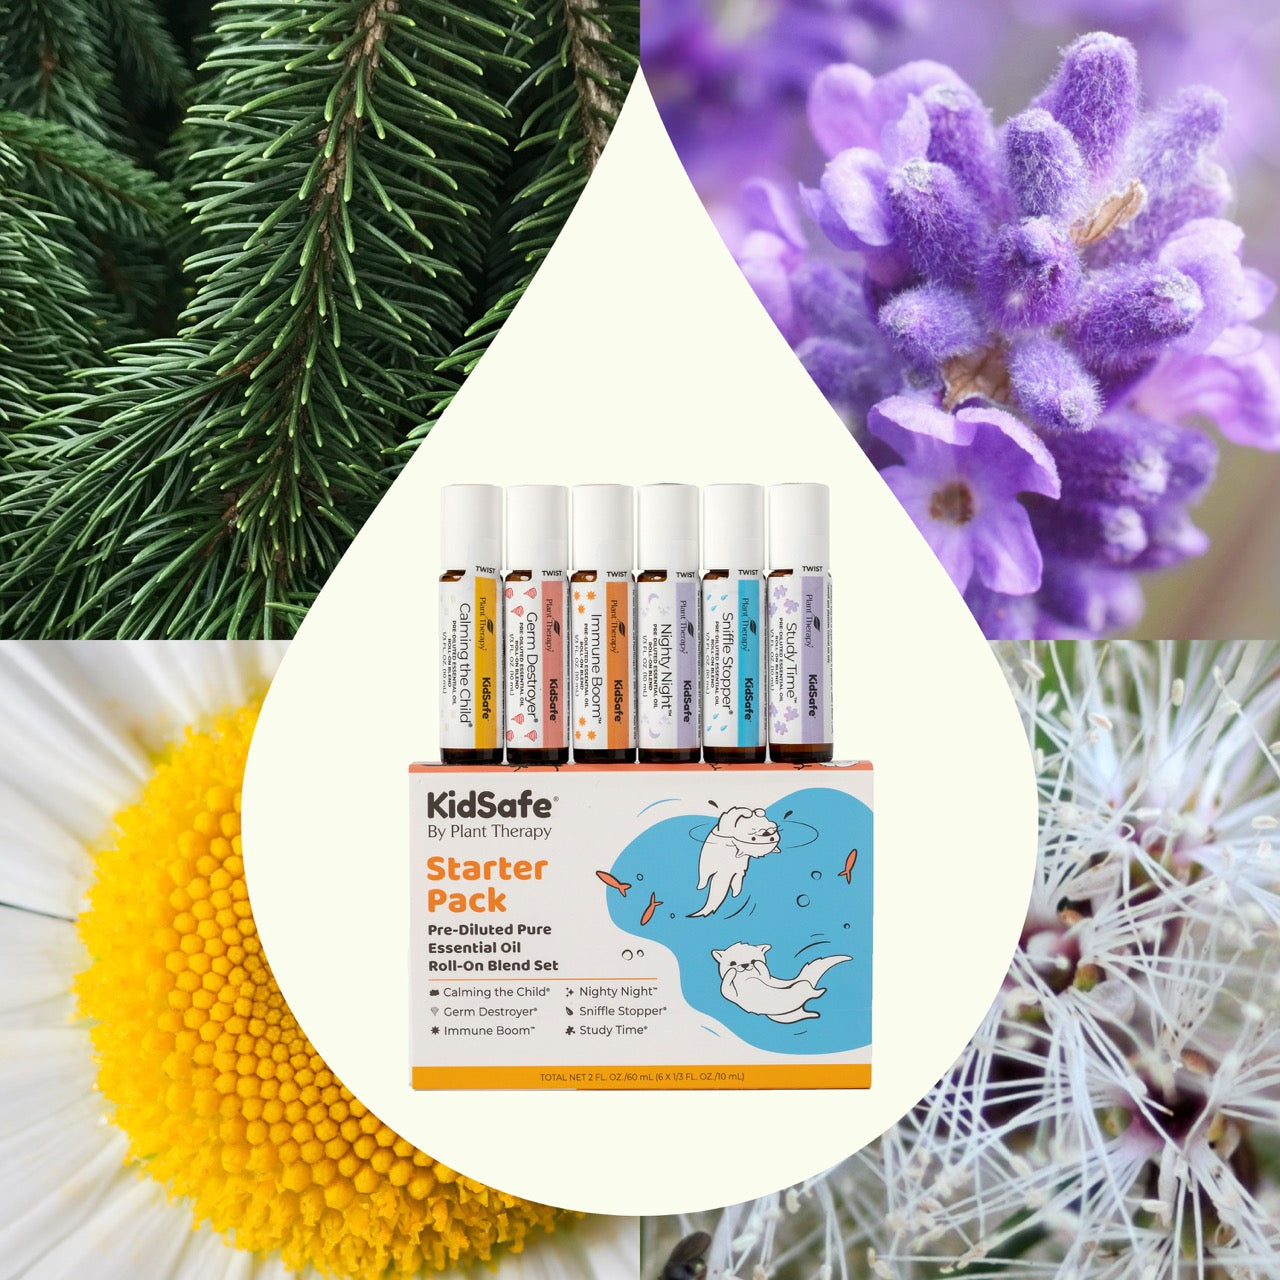 KidSafe Essential Oil Starter Pack Roll-On with key ingredient images